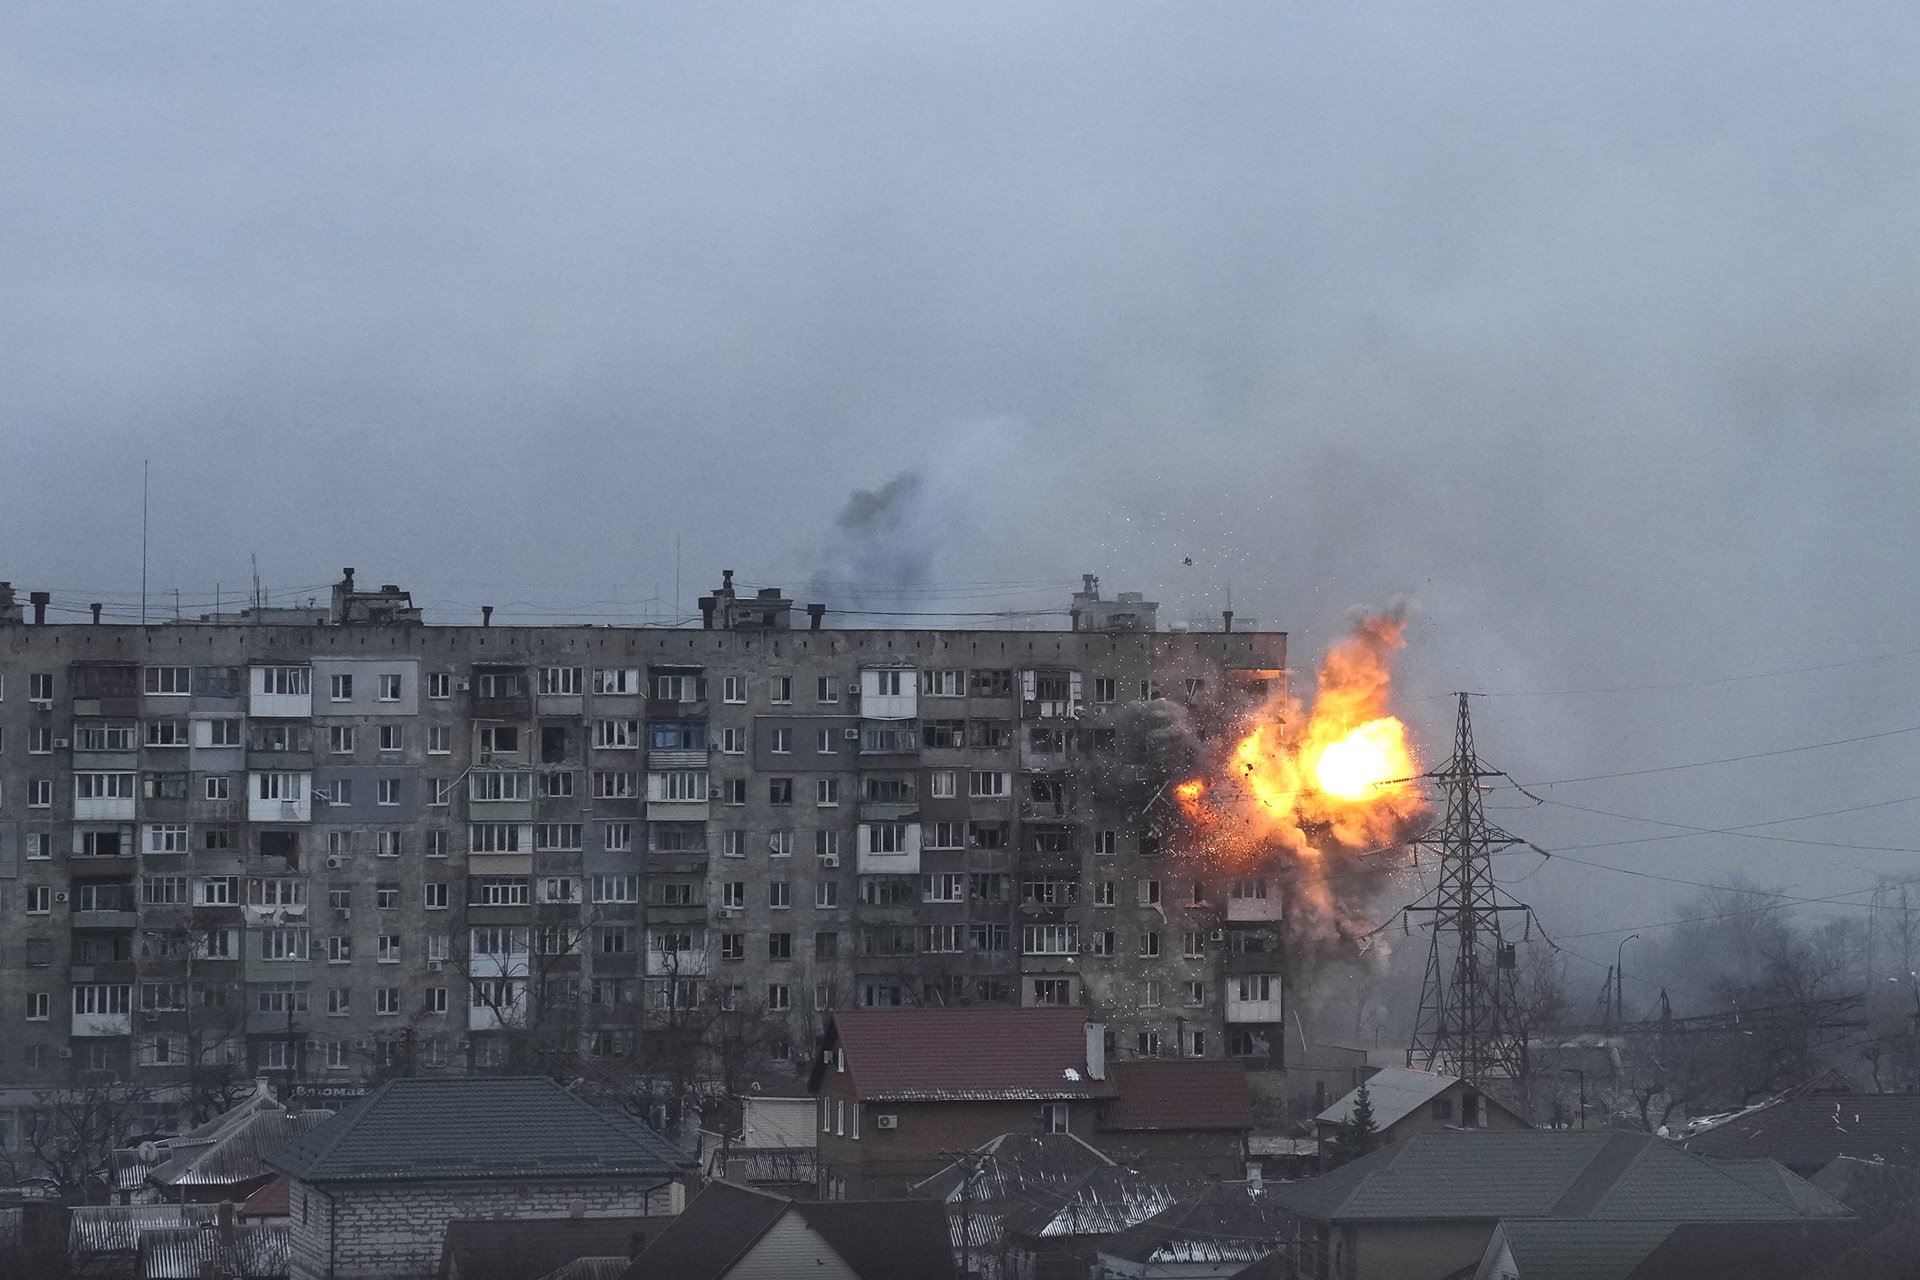 <p>An explosion erupts from an apartment building on Mytropolytska Street, Mariupol, Ukraine, after fire from a Russian army tank. Two elderly women, Lydya and Nataliya, who could not make it down to the basement to shelter, were killed in the attack.</p>
